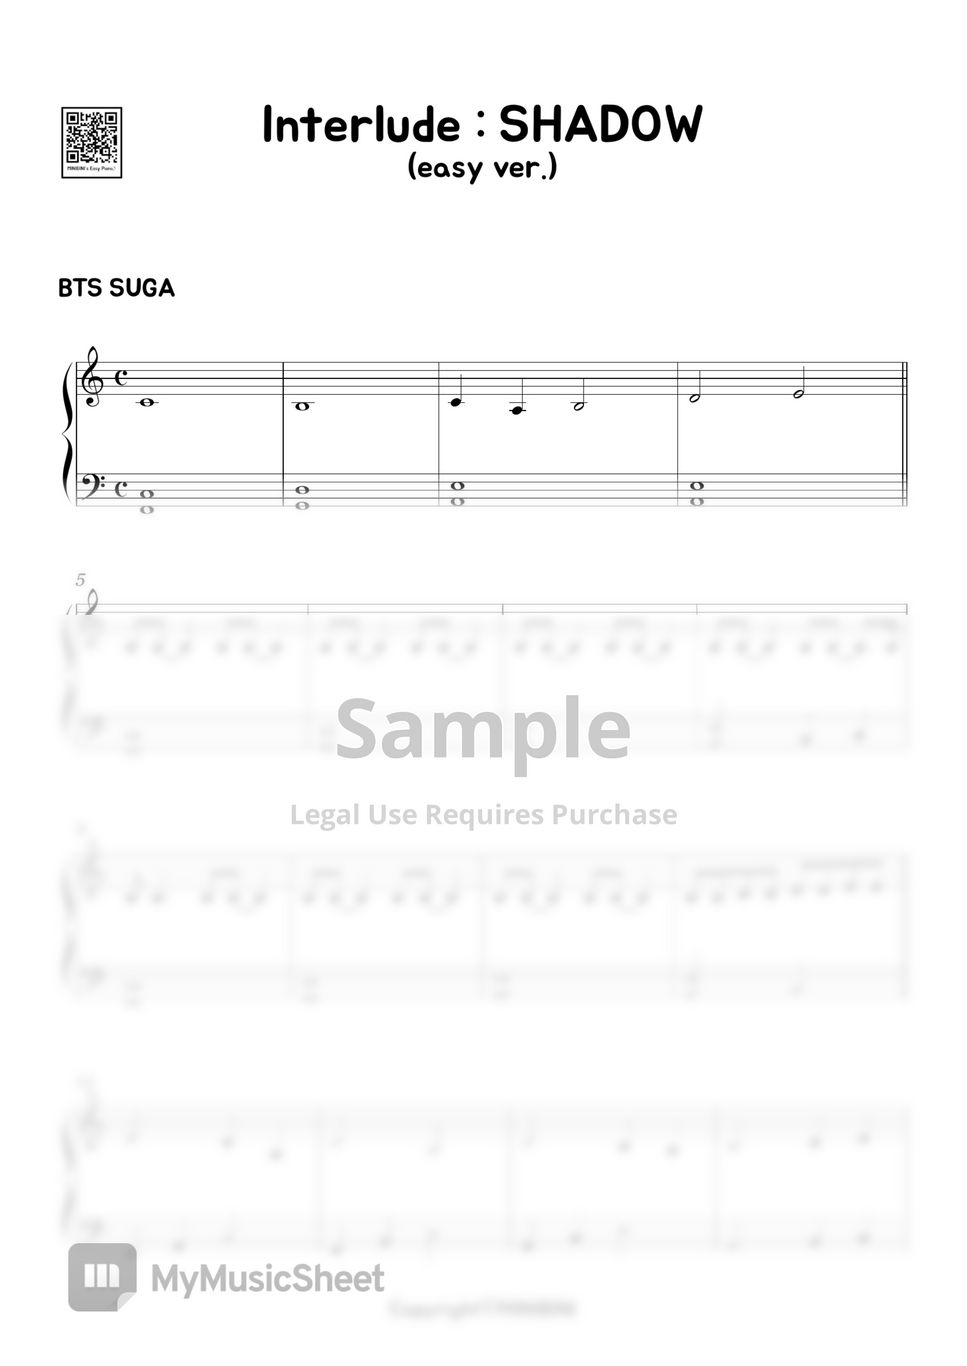 BTS (방탄소년단) - [MAP OF THE SOUL : 7] Full Album Package (Easy Version) by MINIBINI